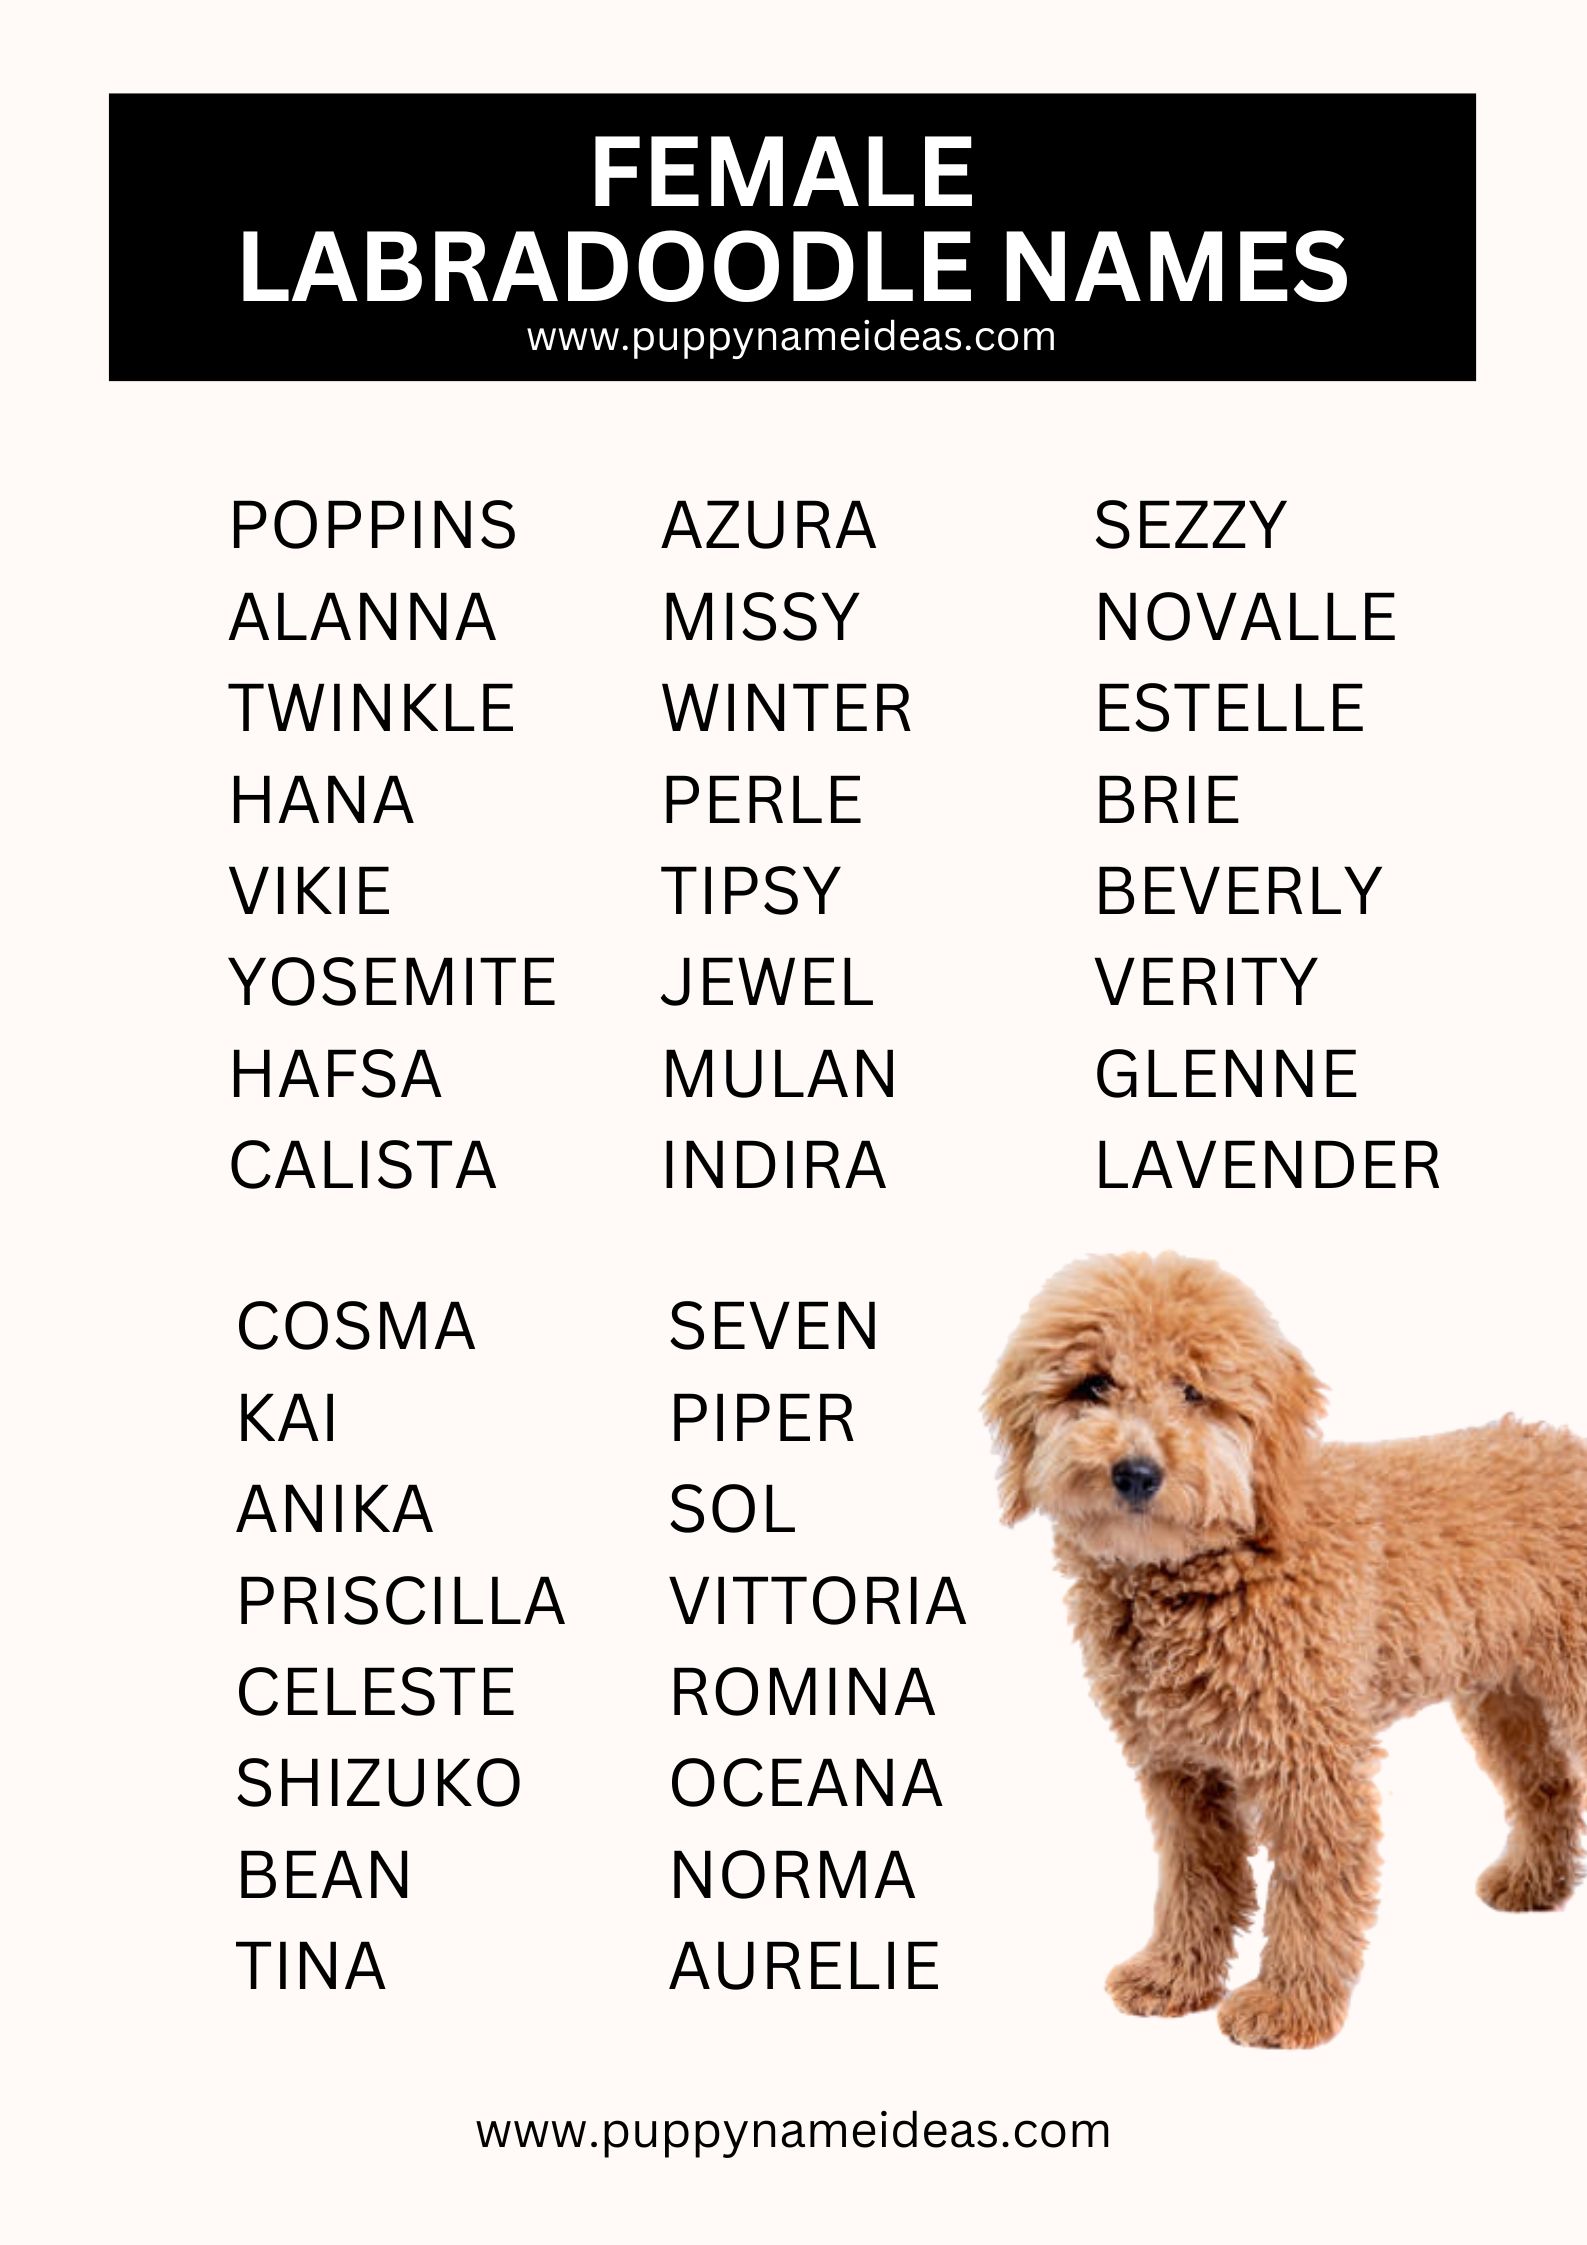 list of female labradoodle names